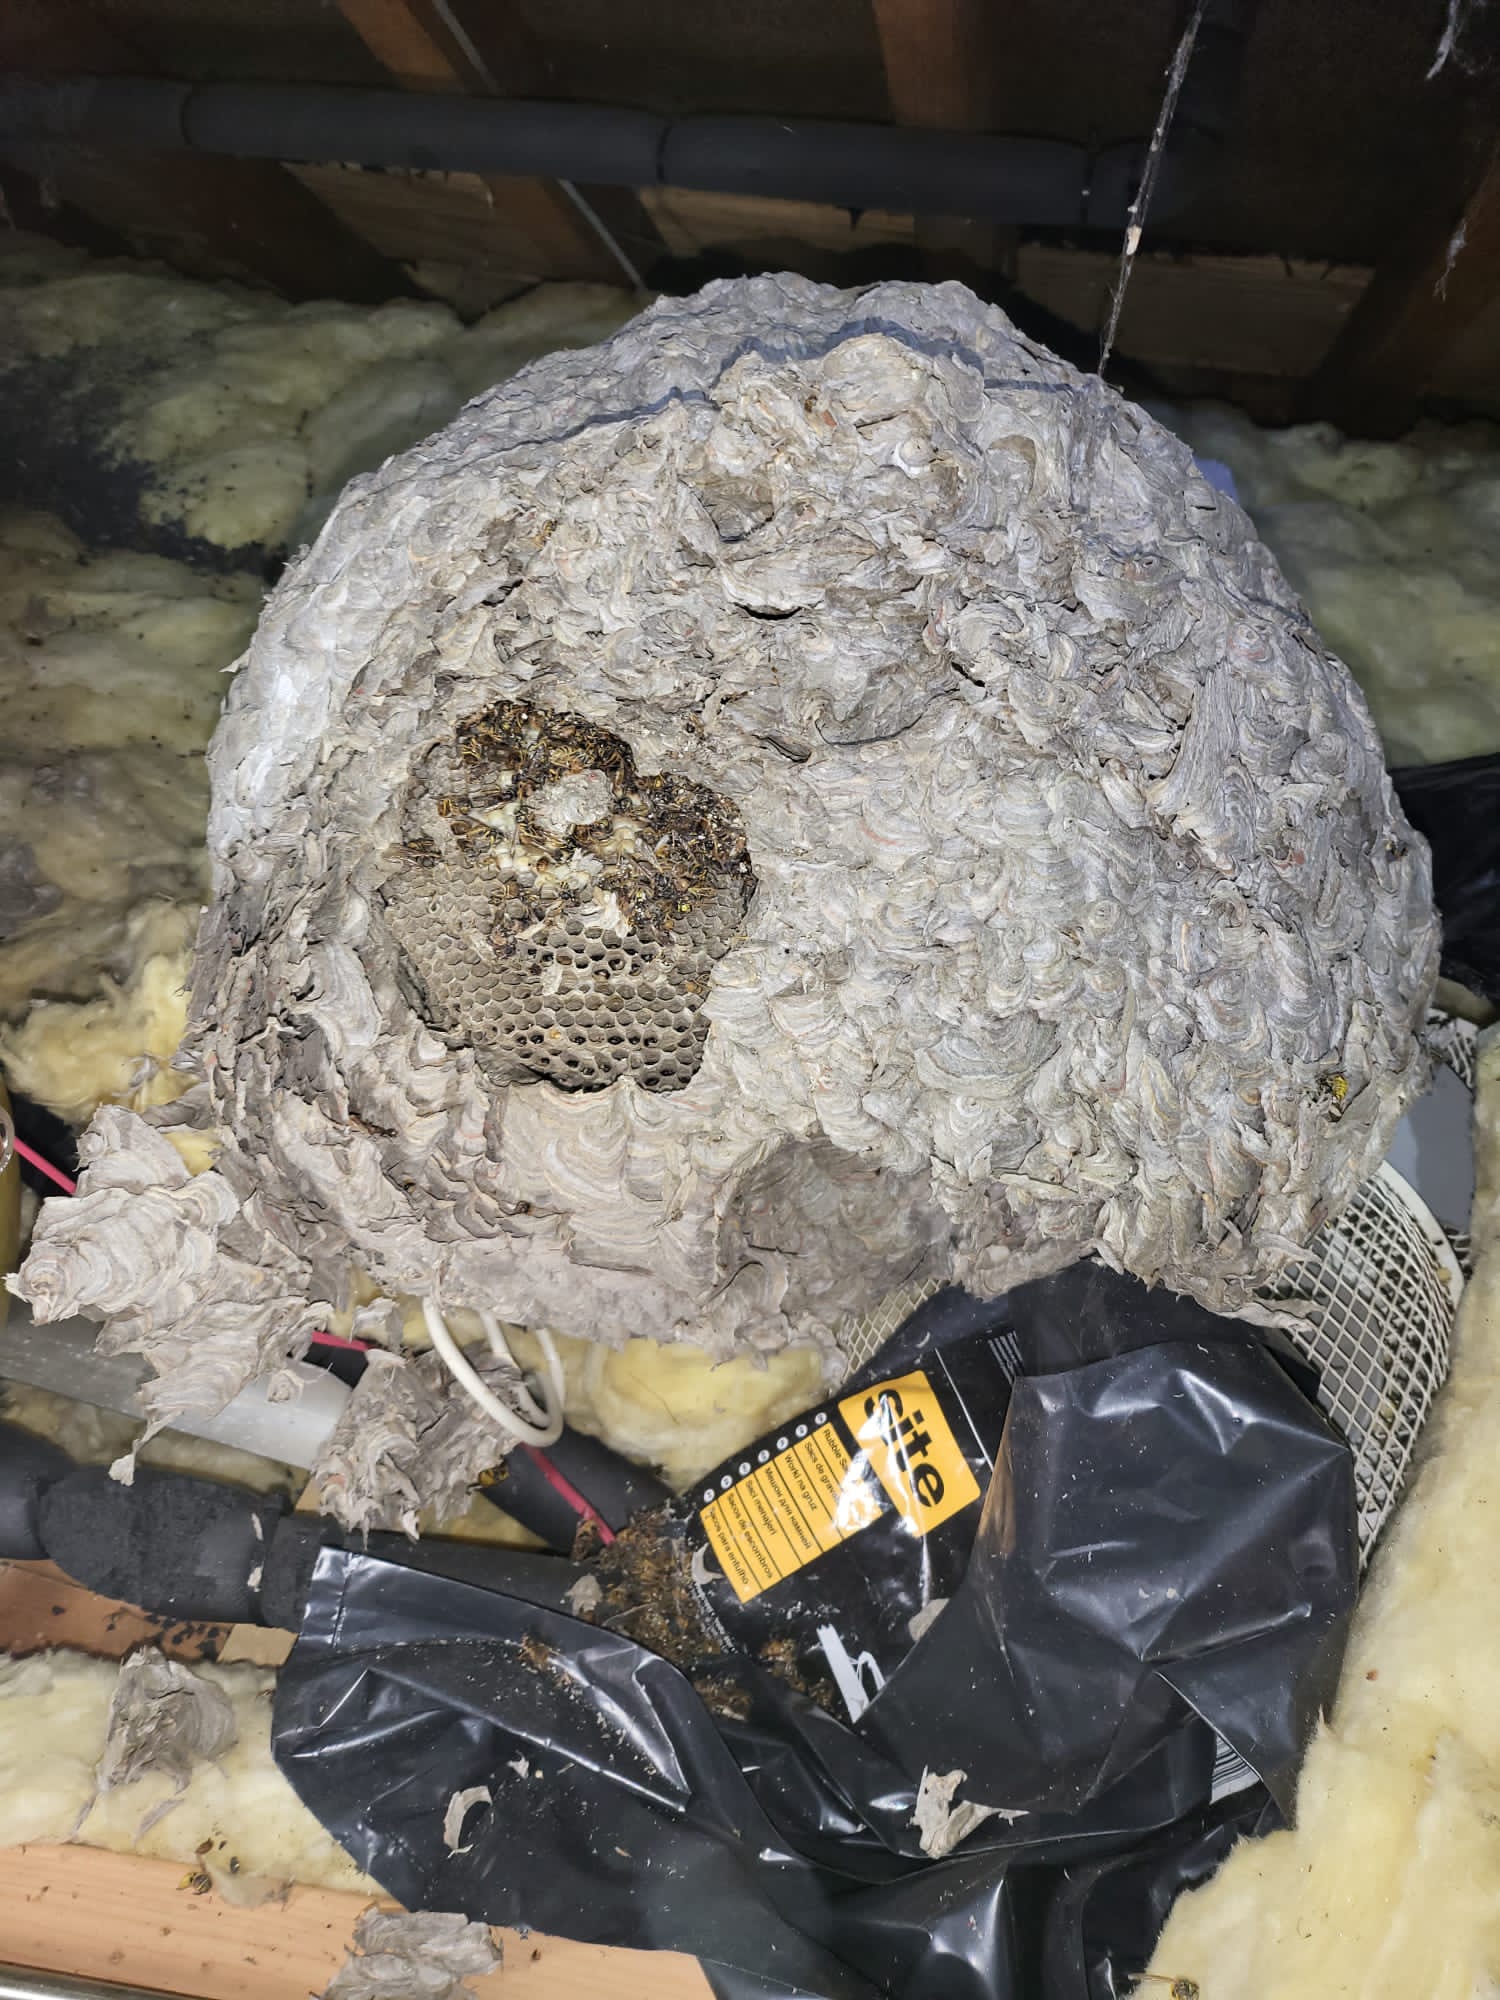 Large wasp nest that has come to fruition